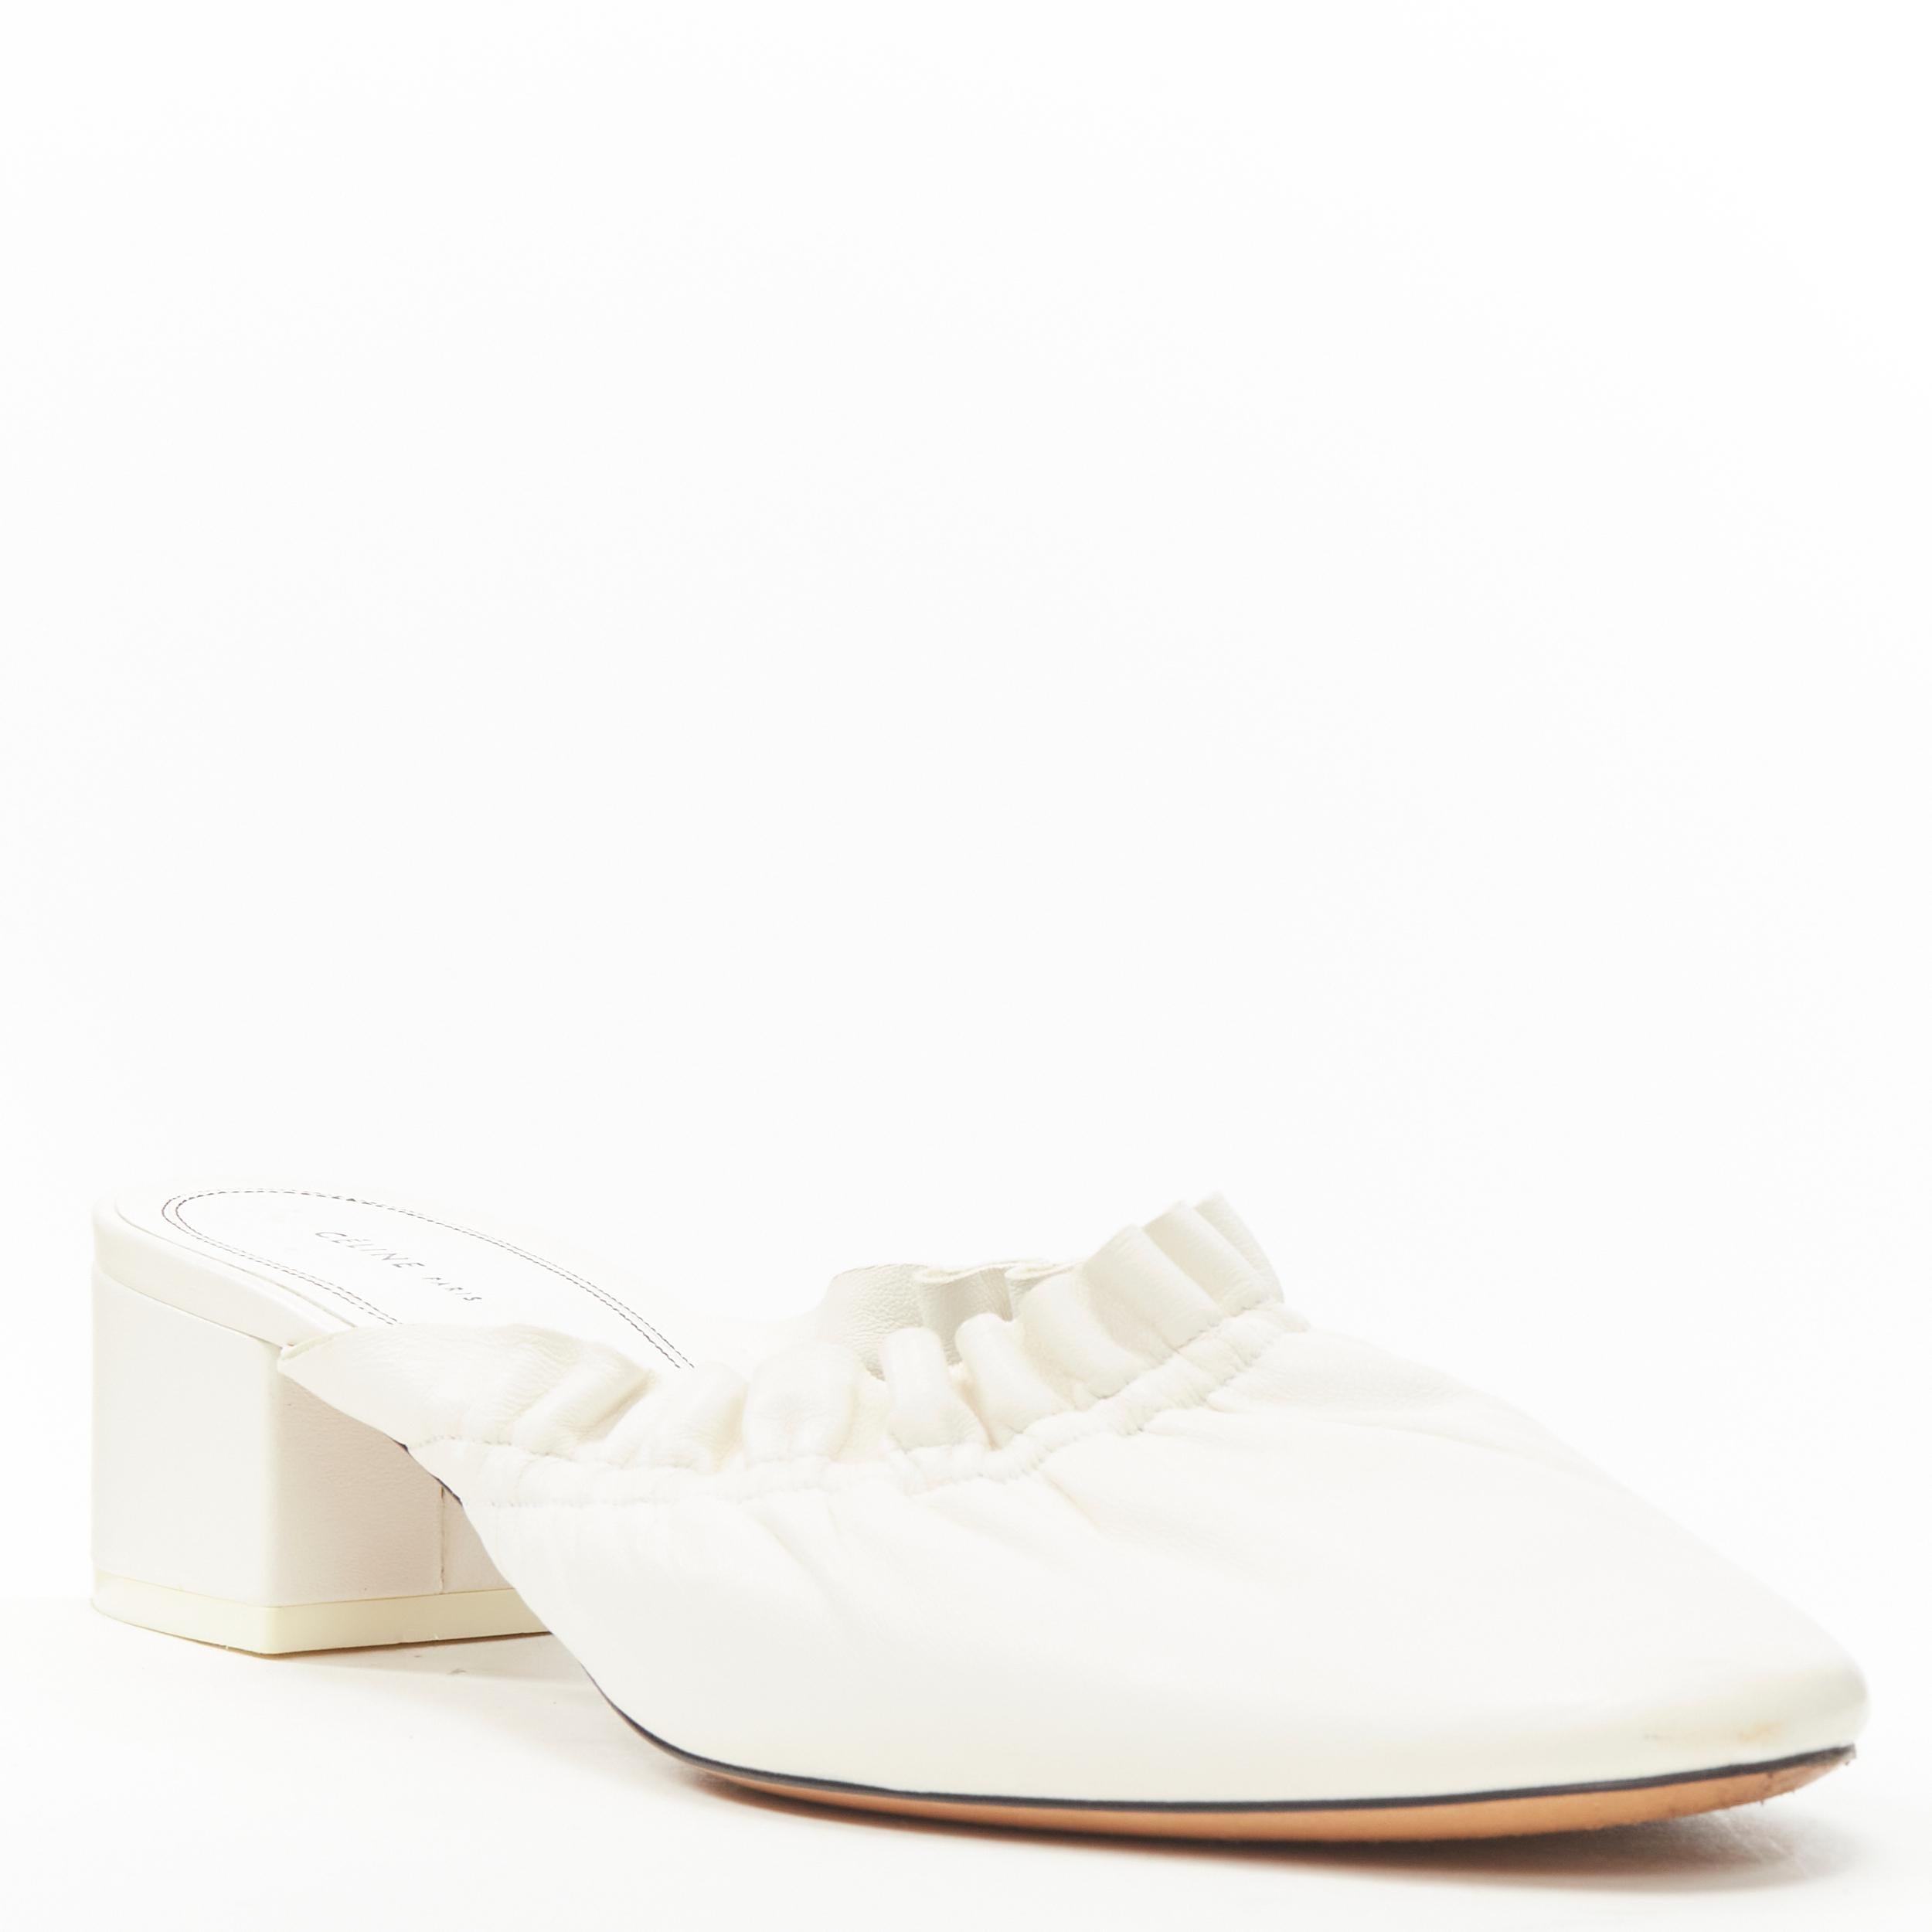 OLD CELINE Phoebe Philo white ruffle elasticated round block heel mules EU37.5 
Reference: LNKO/A01937 
Brand: Celine 
Designer: Phoebe Philo 
Material: Leather 
Color: White 
Pattern: Solid 
Extra Detail: Elasticated ruffle upper. Block